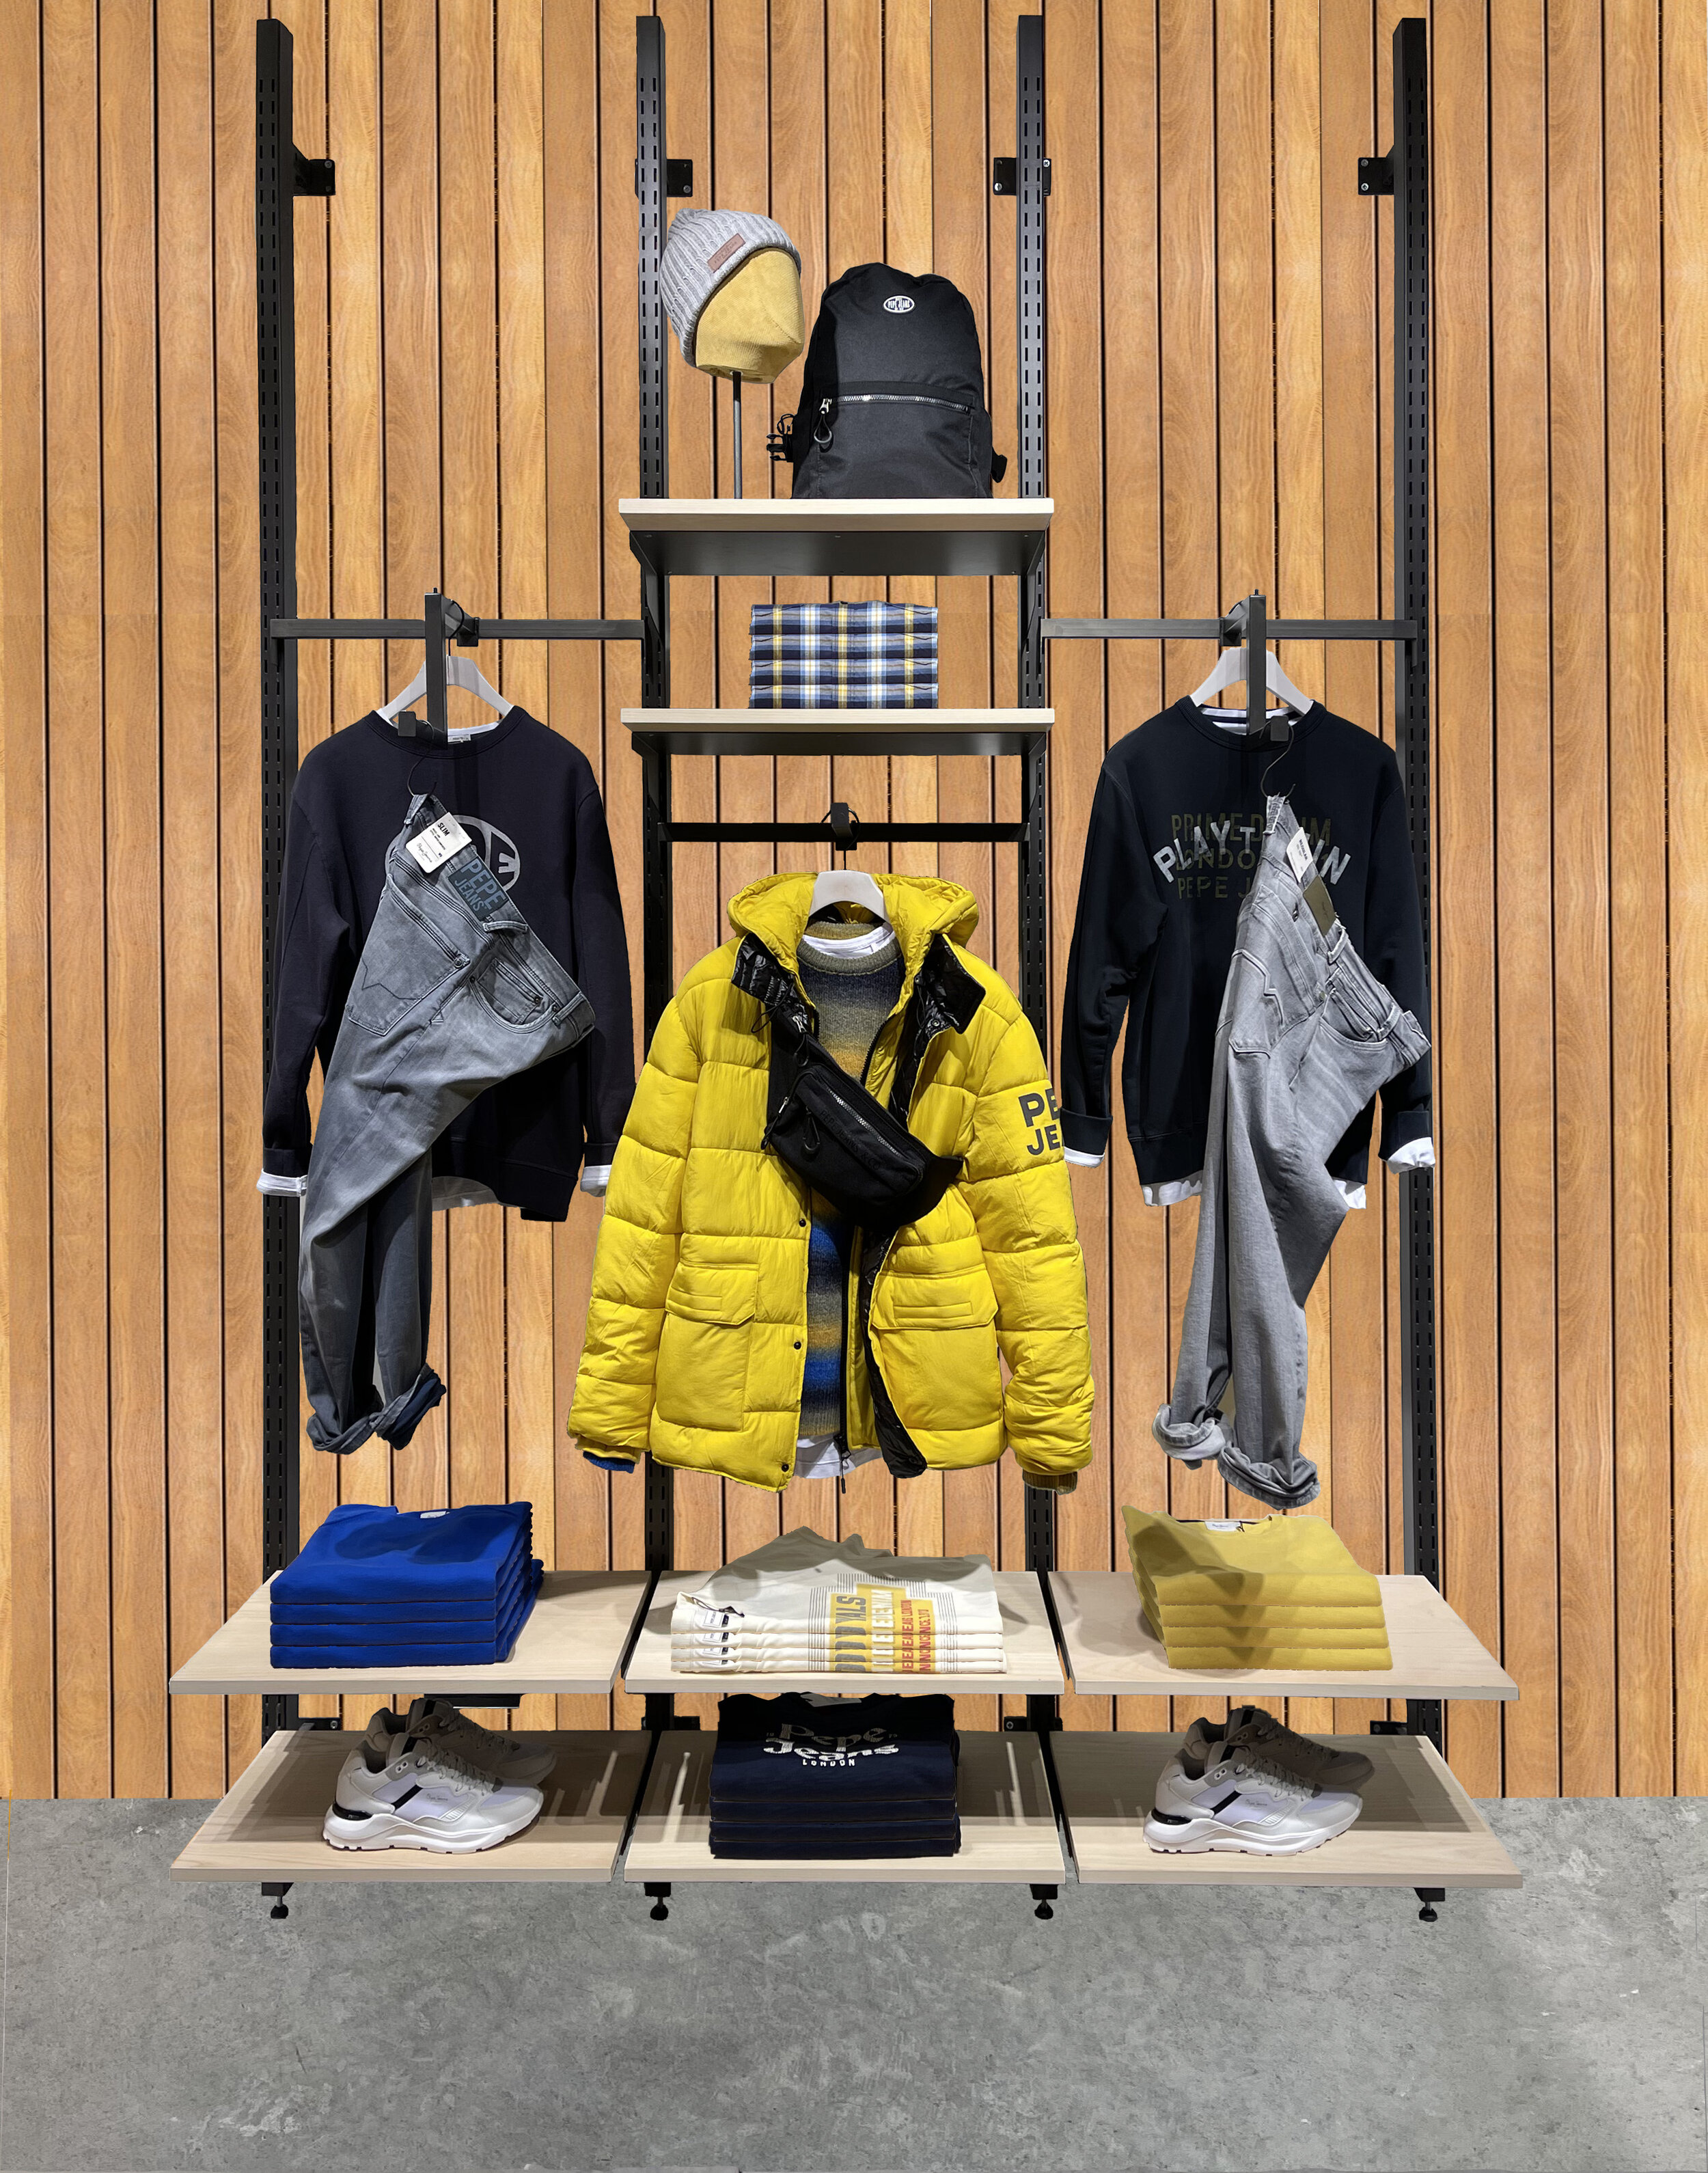 Pepe Jeans wall by Coco.JPG